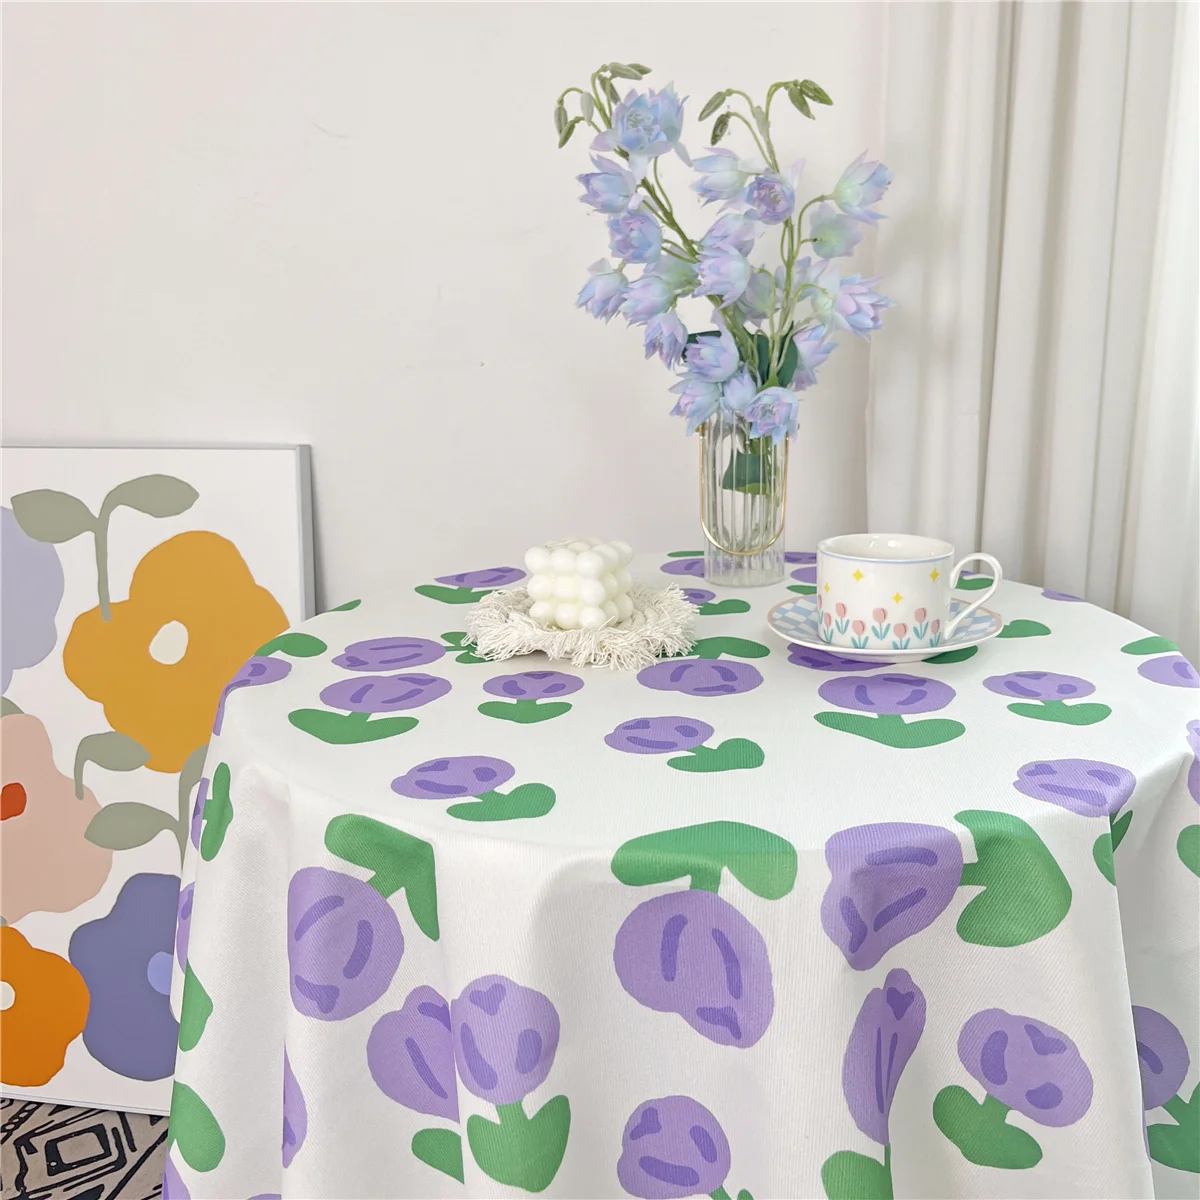 

Checkered tablecloth, desk, bedroom, dormitory, fabric art girl, table mat, rectangular makeup table, small and fresh